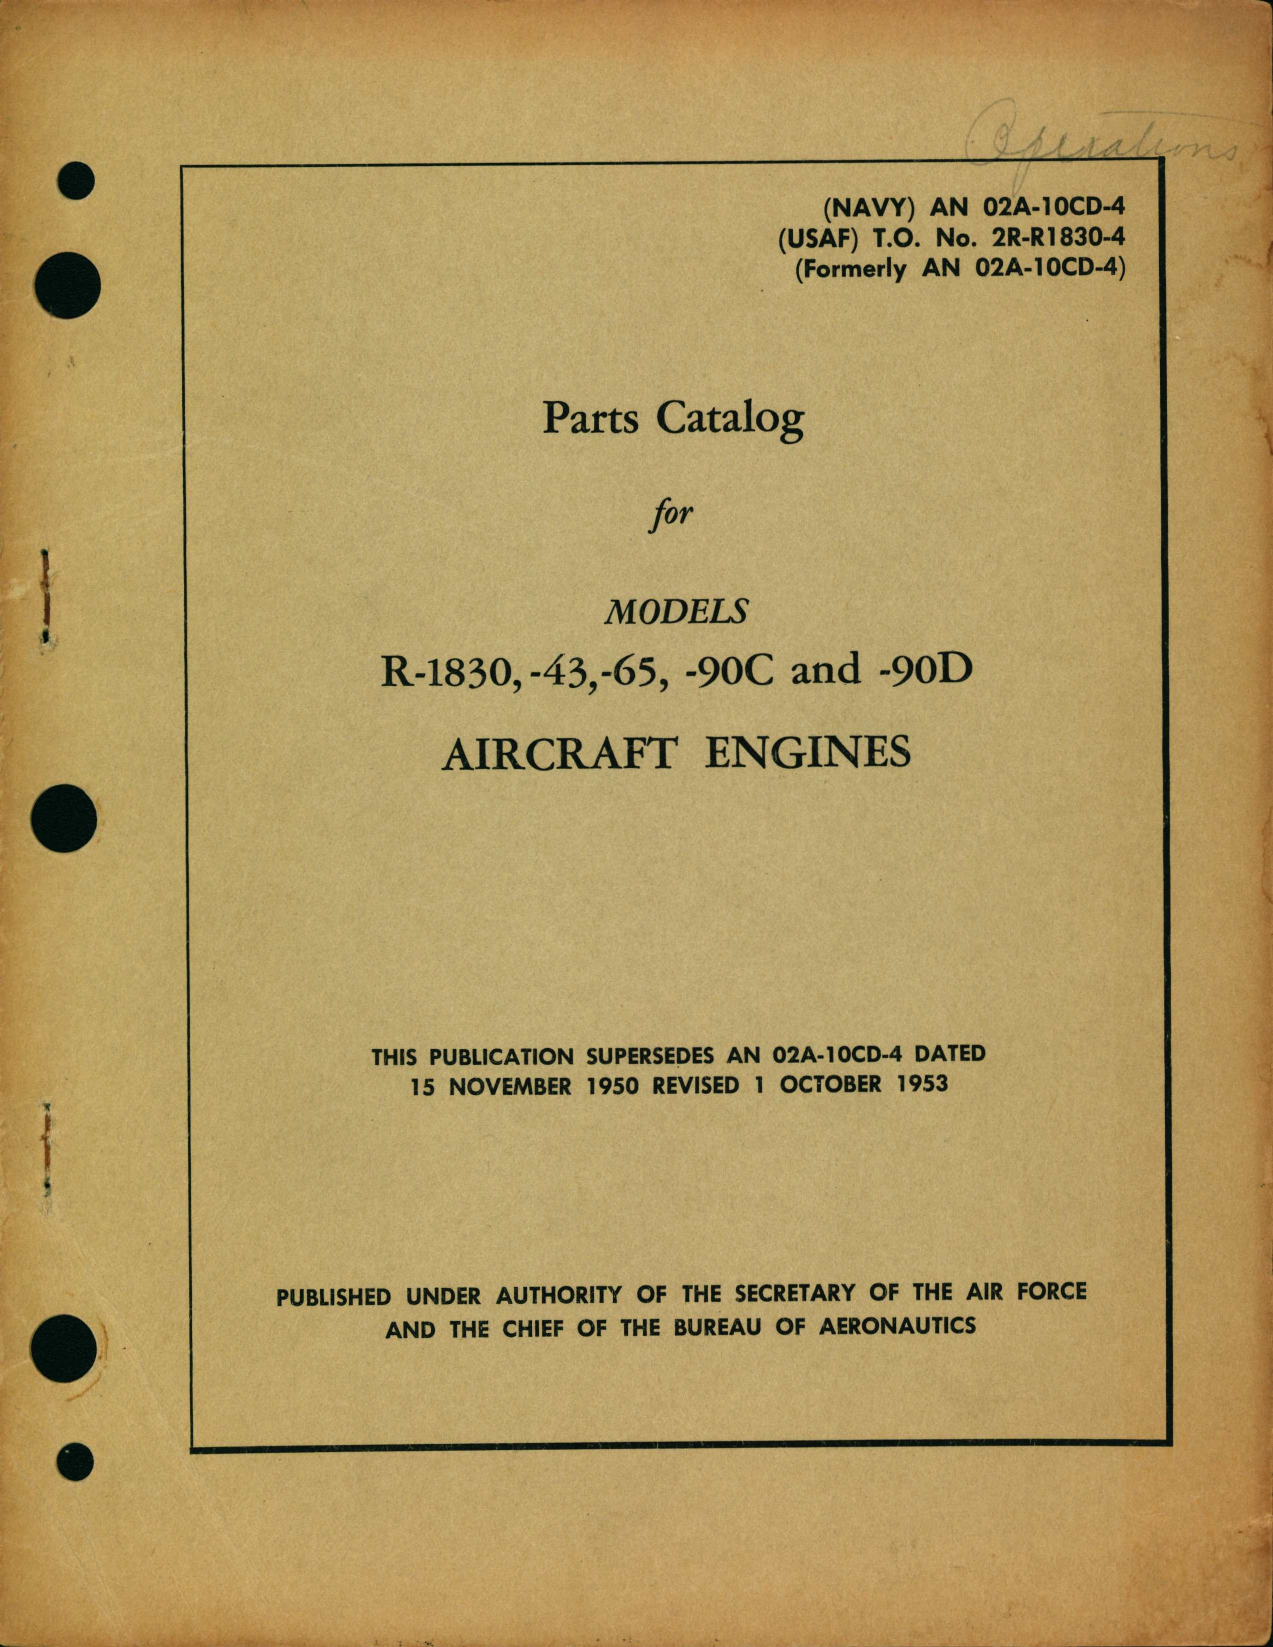 Sample page 1 from AirCorps Library document: Parts Catalog for Models R-1830, -43, -65, -90C and -90D Engines